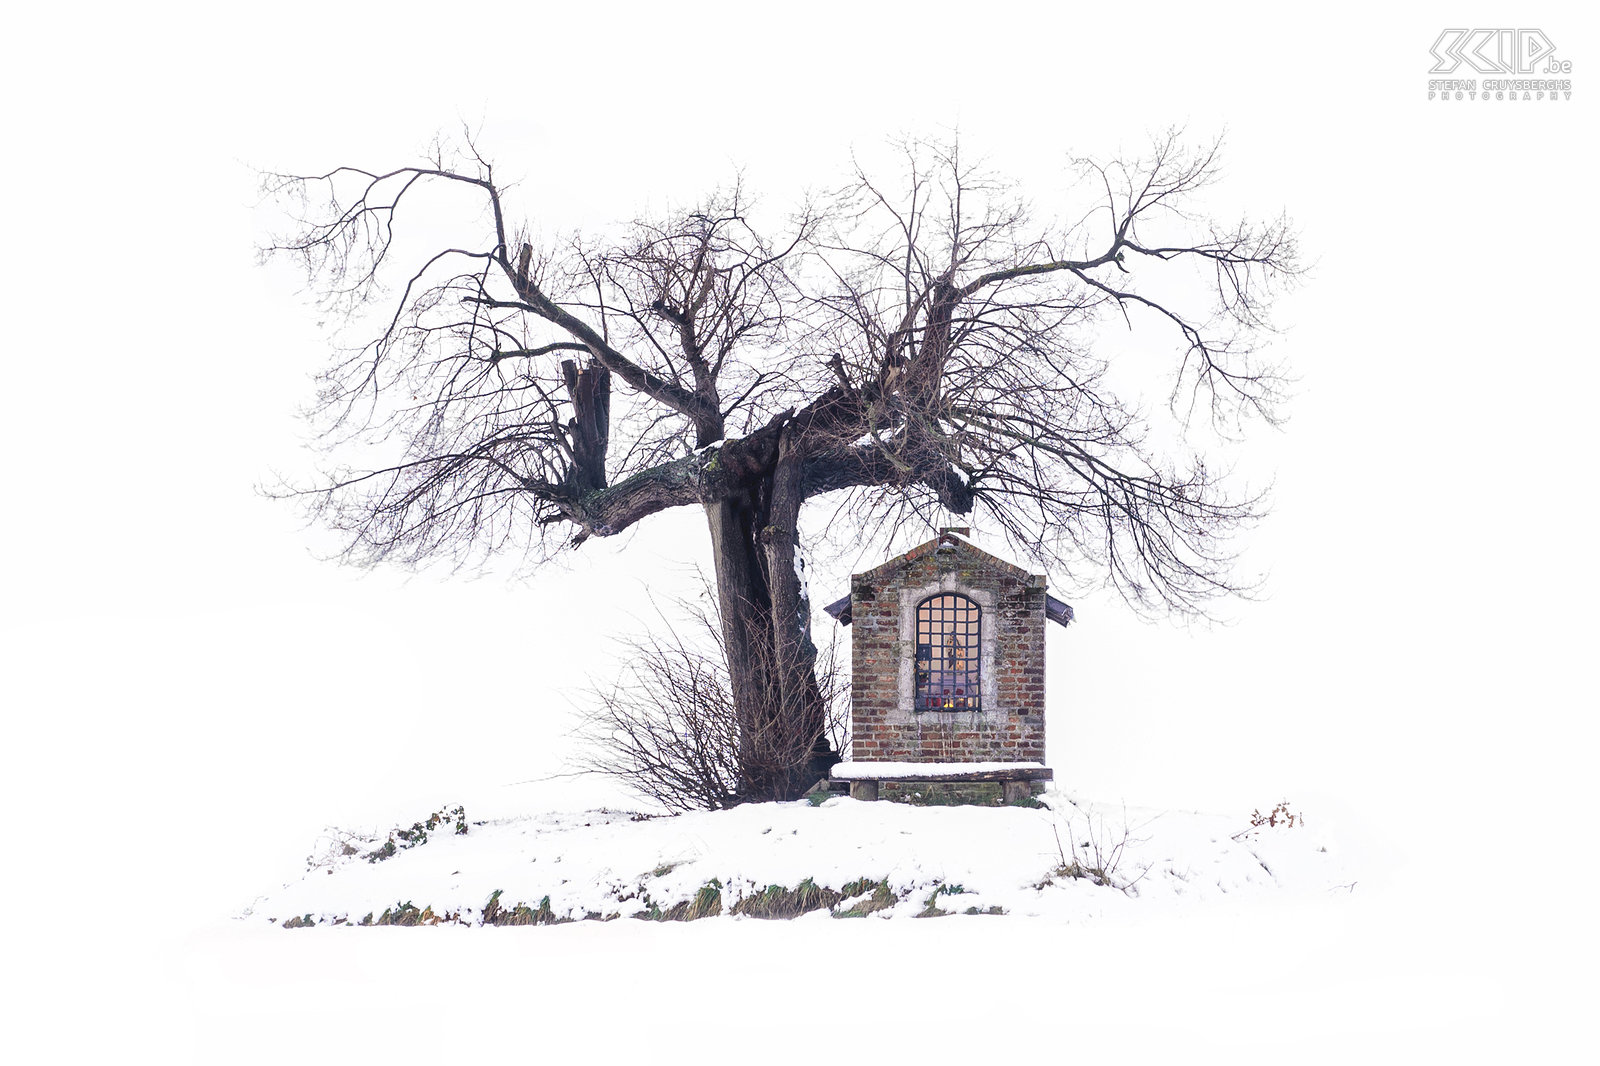 Winter in Sint-Pieters-Rode - Chapel ‘High key’ photo of the small chapel of Saint Joseph. The chapel is located in a field under an old linden tree. This tree was damaged during a storm in 2014. Stefan Cruysberghs